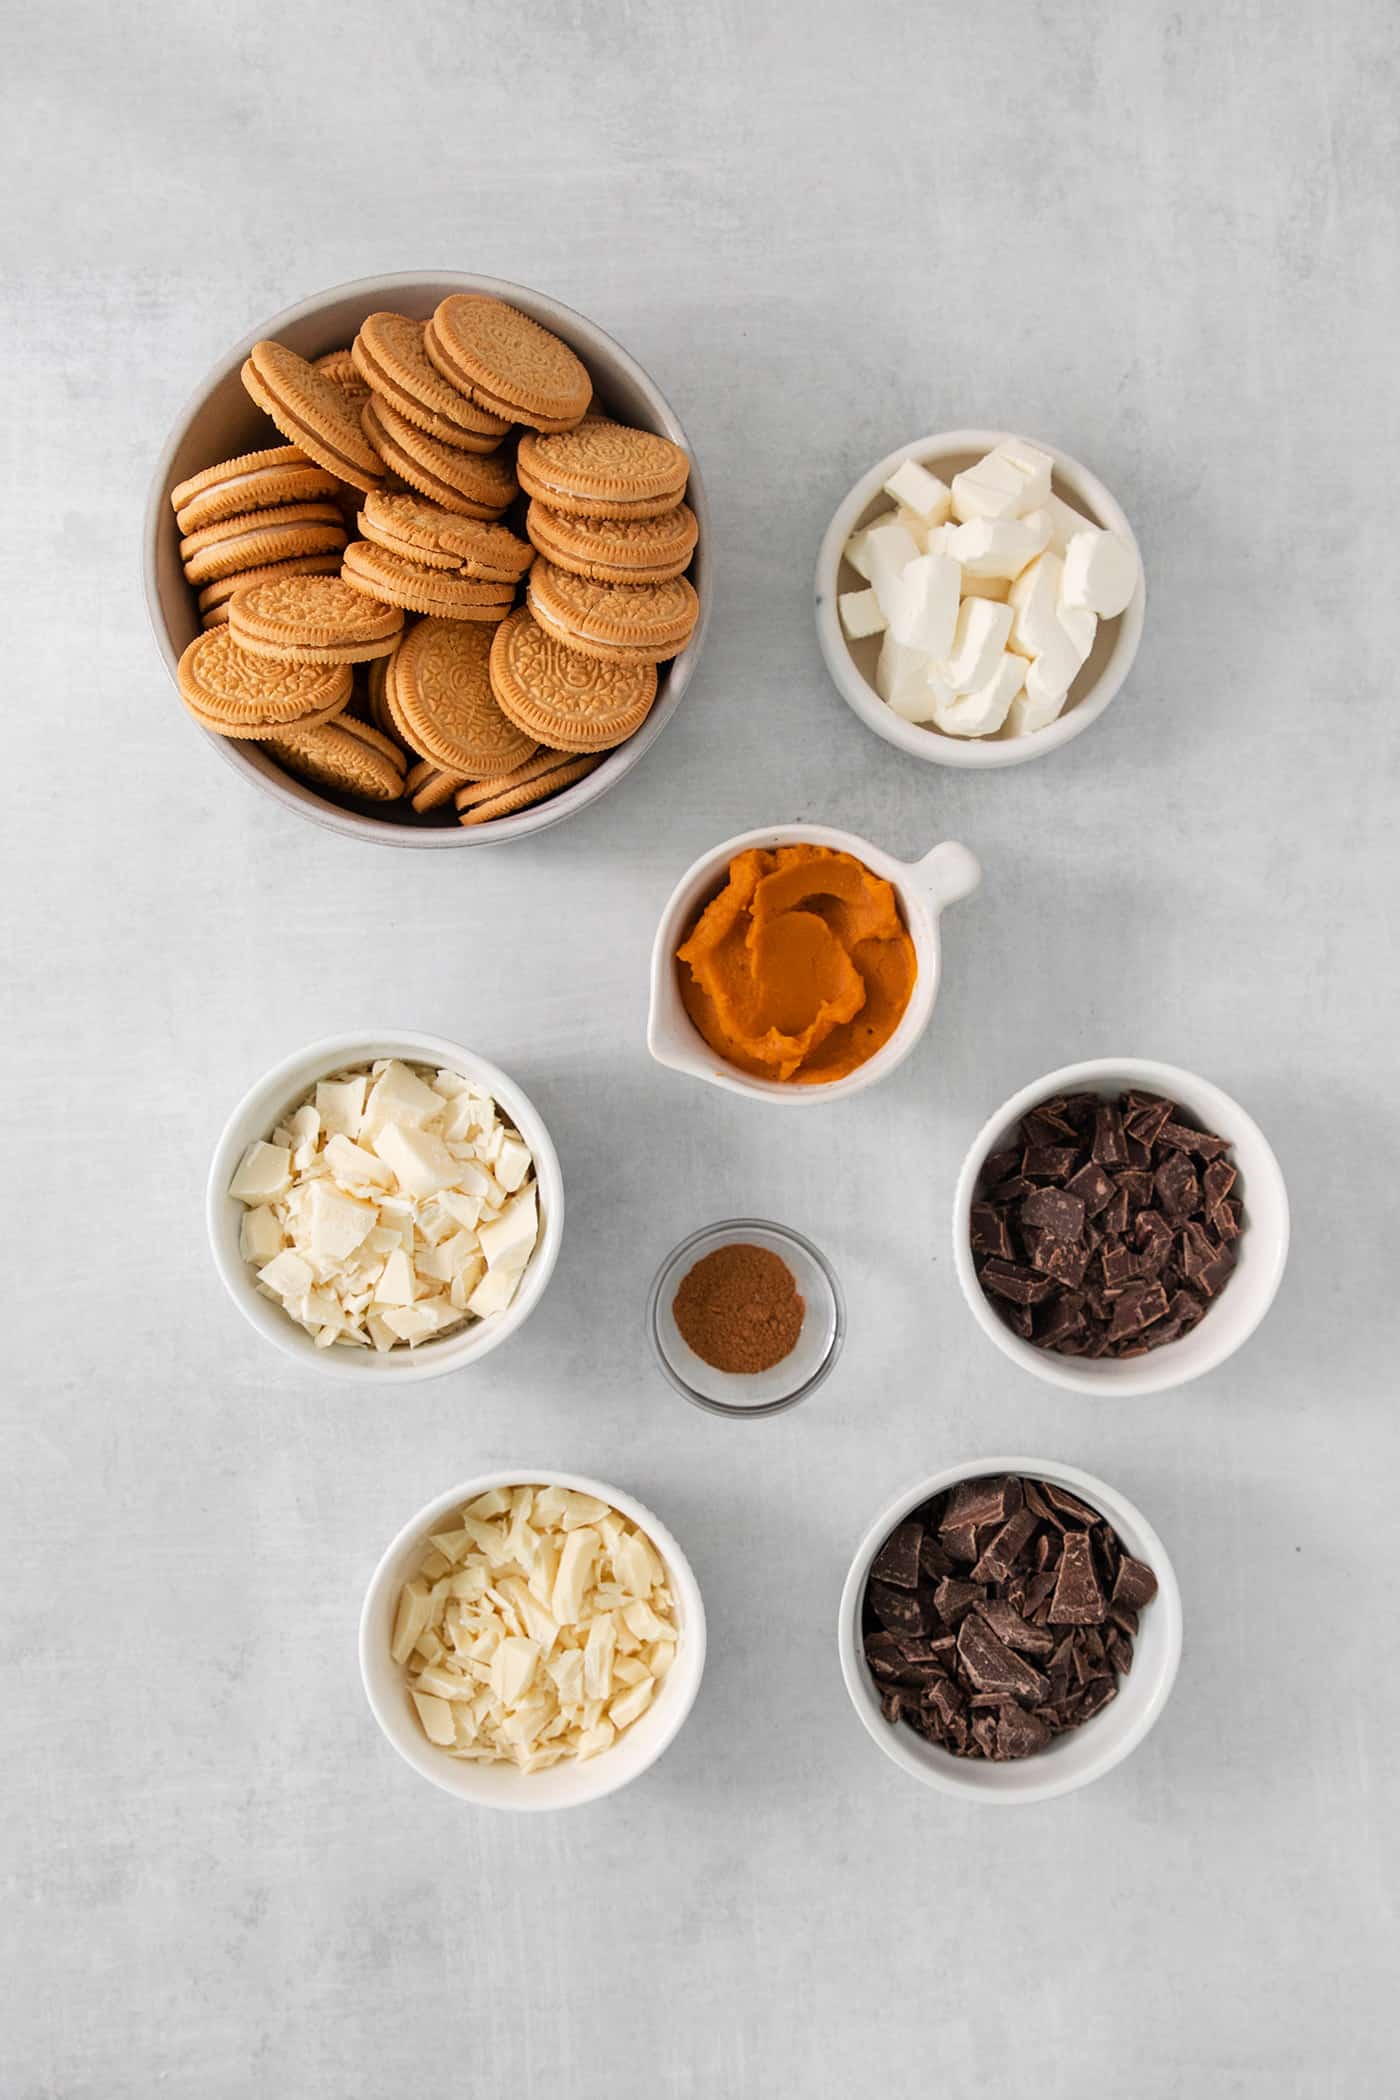 Ingredients for pumpkin pie truffles are shown in bowls: golden Oreos, pumpkin puree, sugar, spices, and cream cheese.